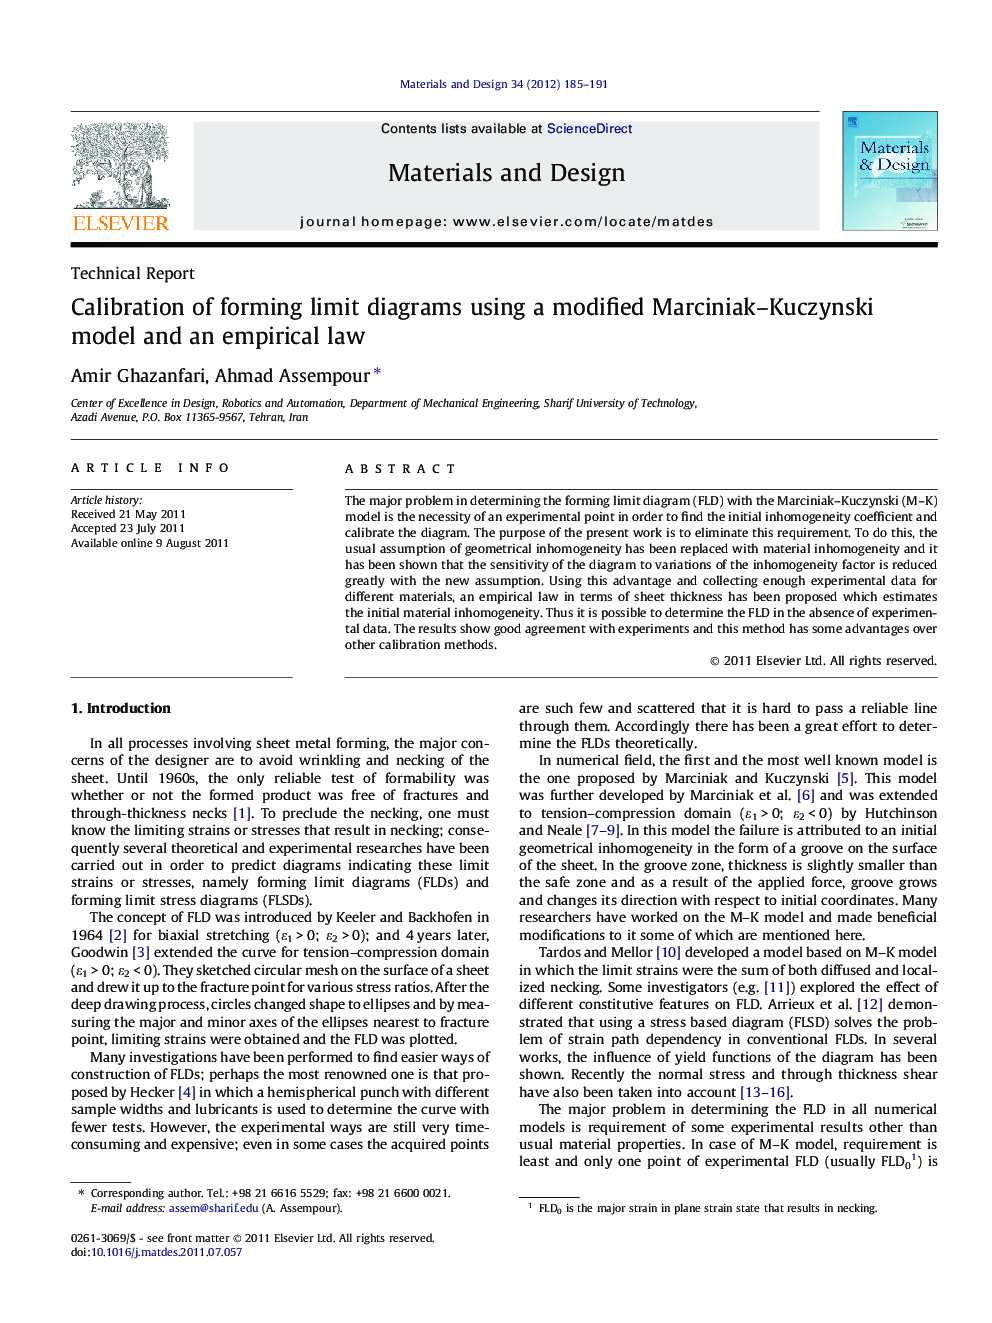 Calibration of forming limit diagrams using a modified Marciniak–Kuczynski model and an empirical law